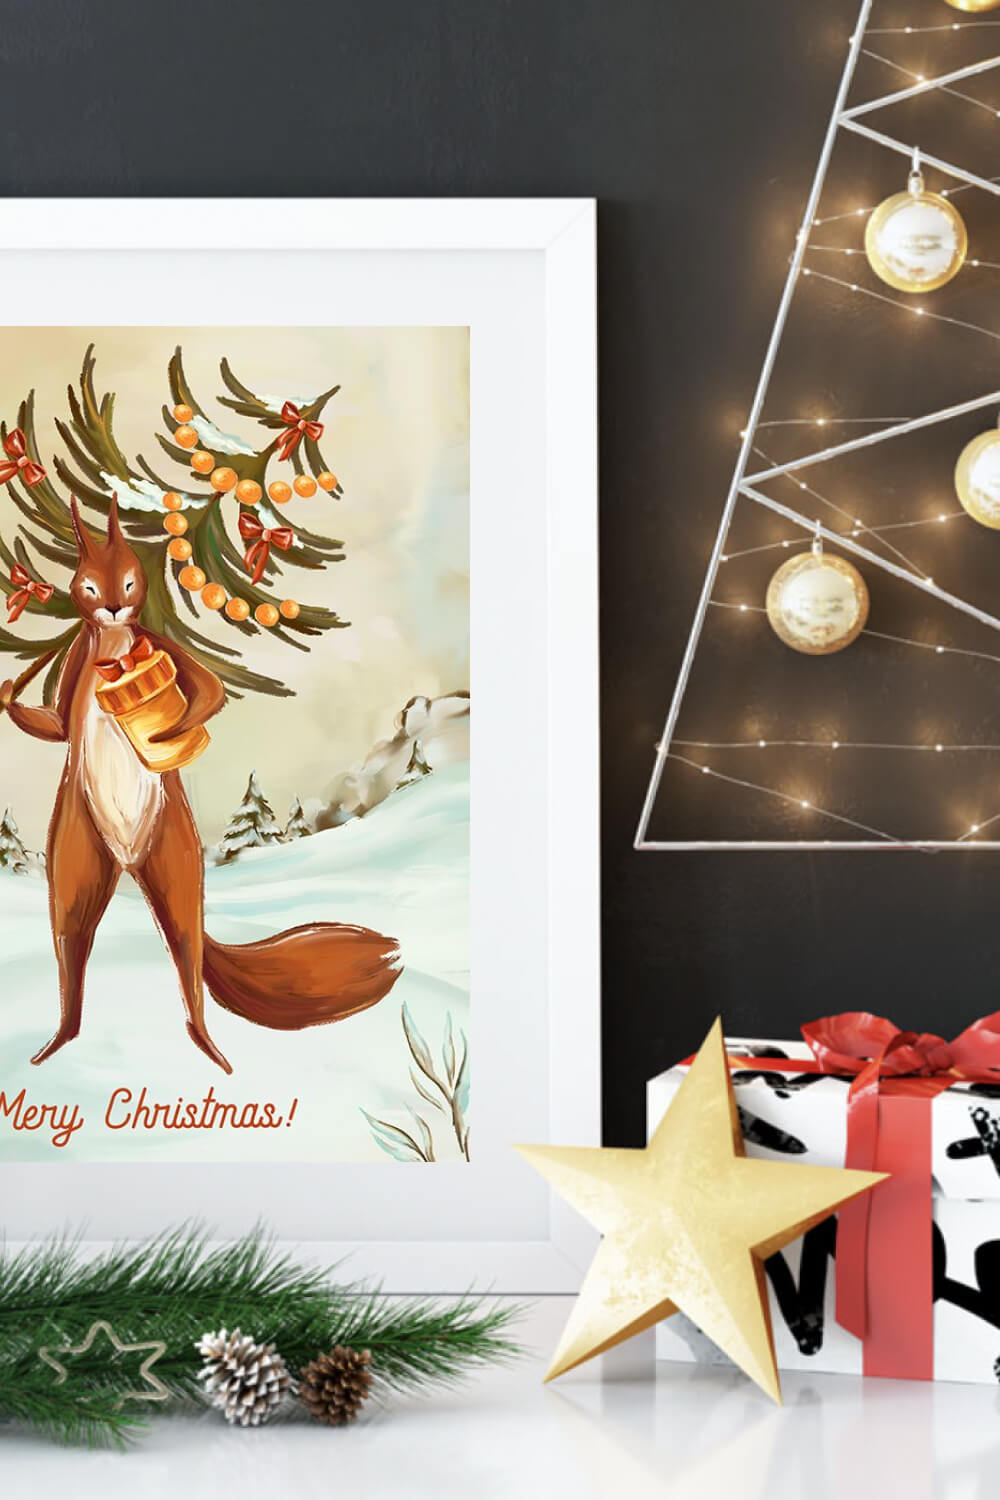 Christmas design decorated with a picture of a squirrel and a Christmas tree.